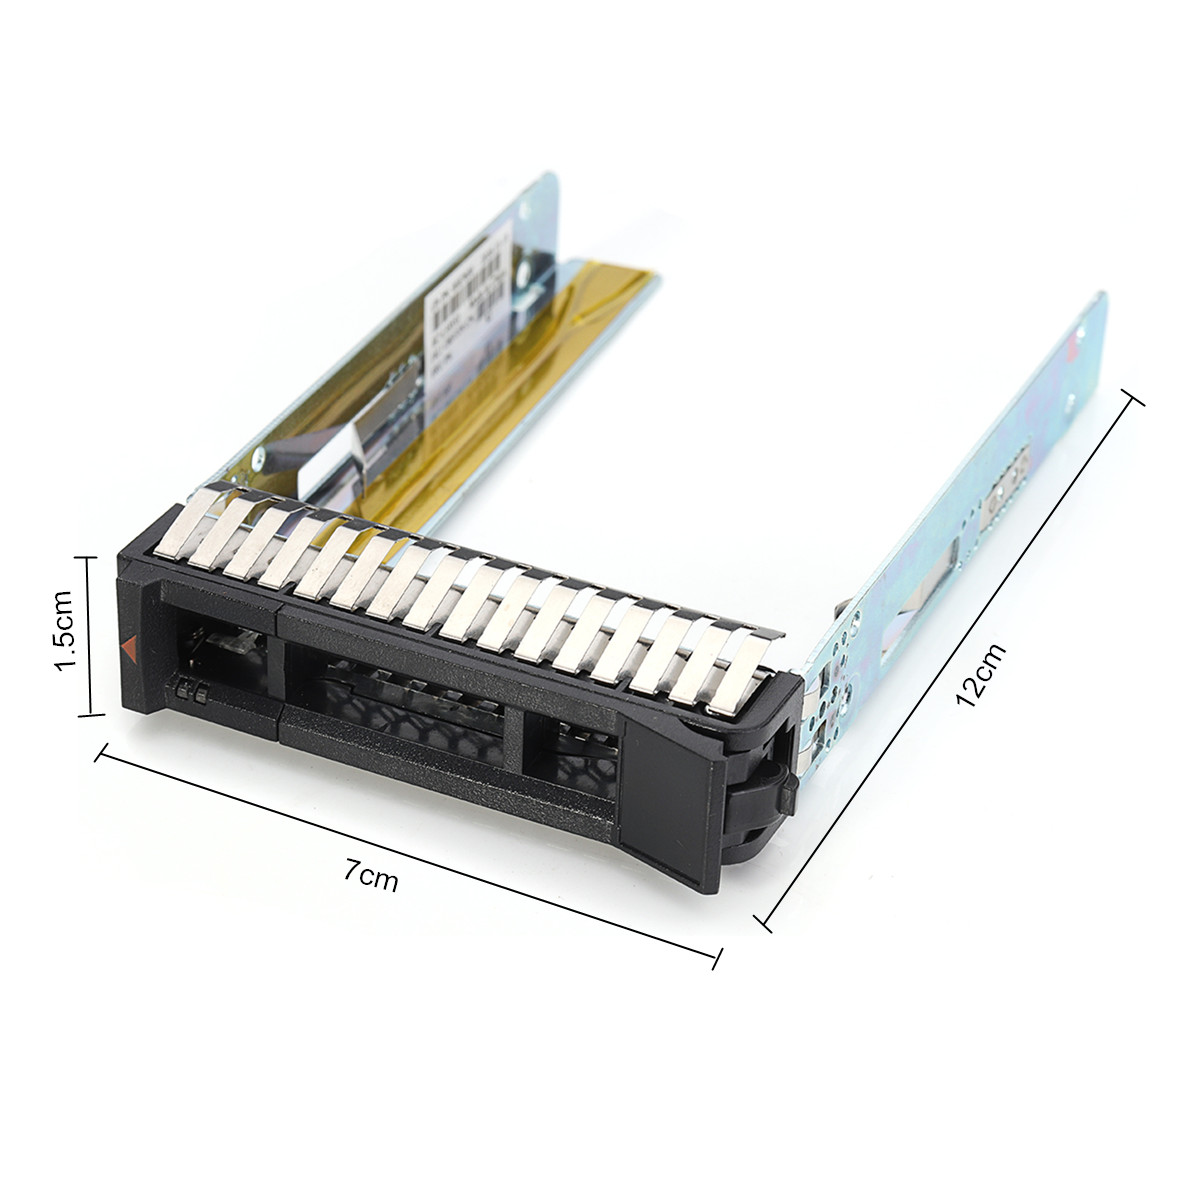 25quot-Hard-Drive-Caddy-Tray-Converter-For-IBM-X3650-M5-For-IBM-00E7600-Following-Server-1301945